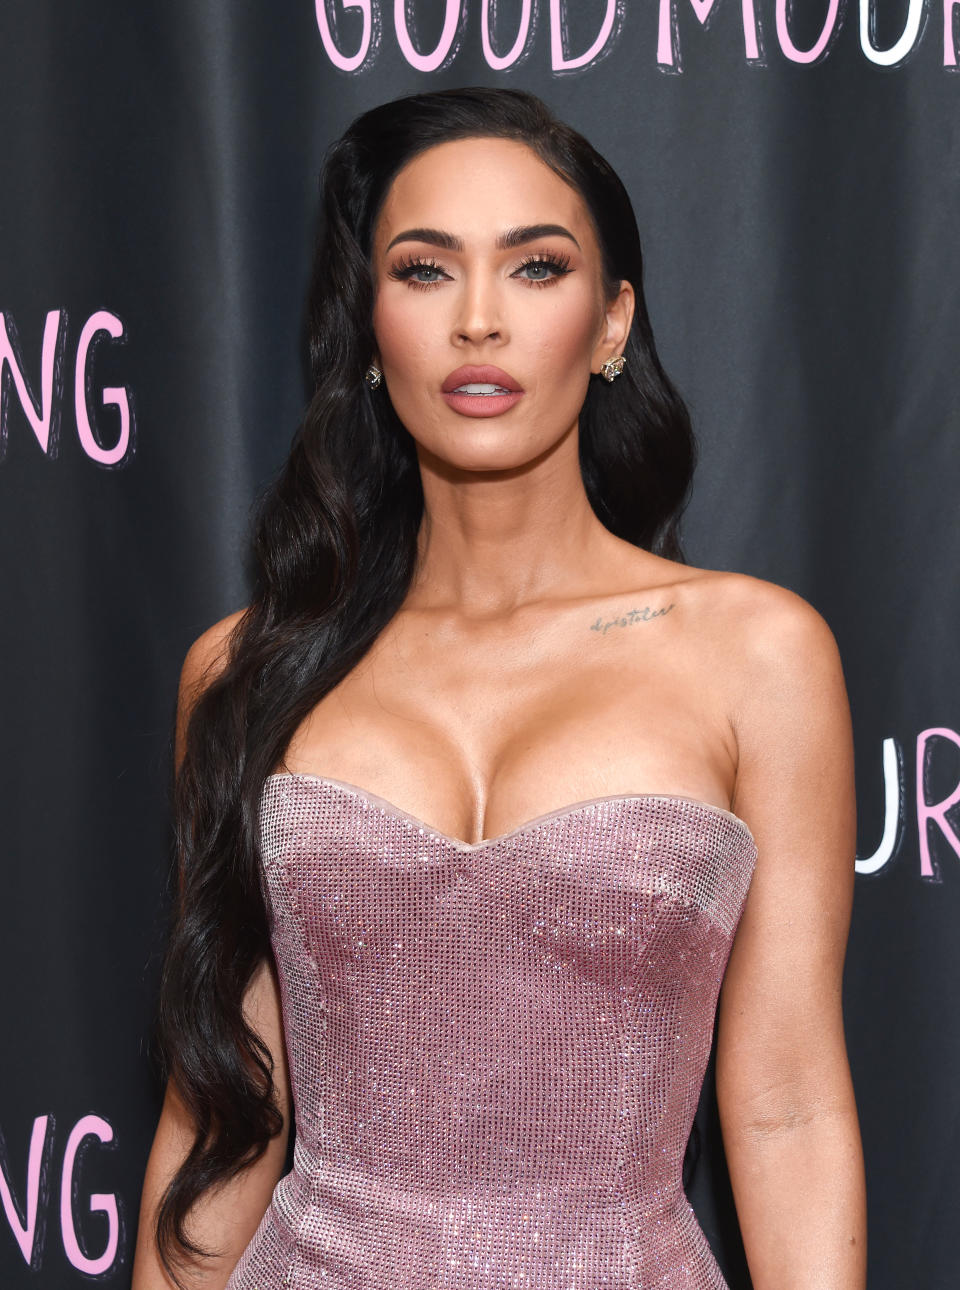 Megan Fox at the premiere of 'Good Mourning' held at The London West Hollywood on May 12th, 2022 in West Hollywood, California. (Photo by Gilbert Flores/Variety/Penske Media via Getty Images)